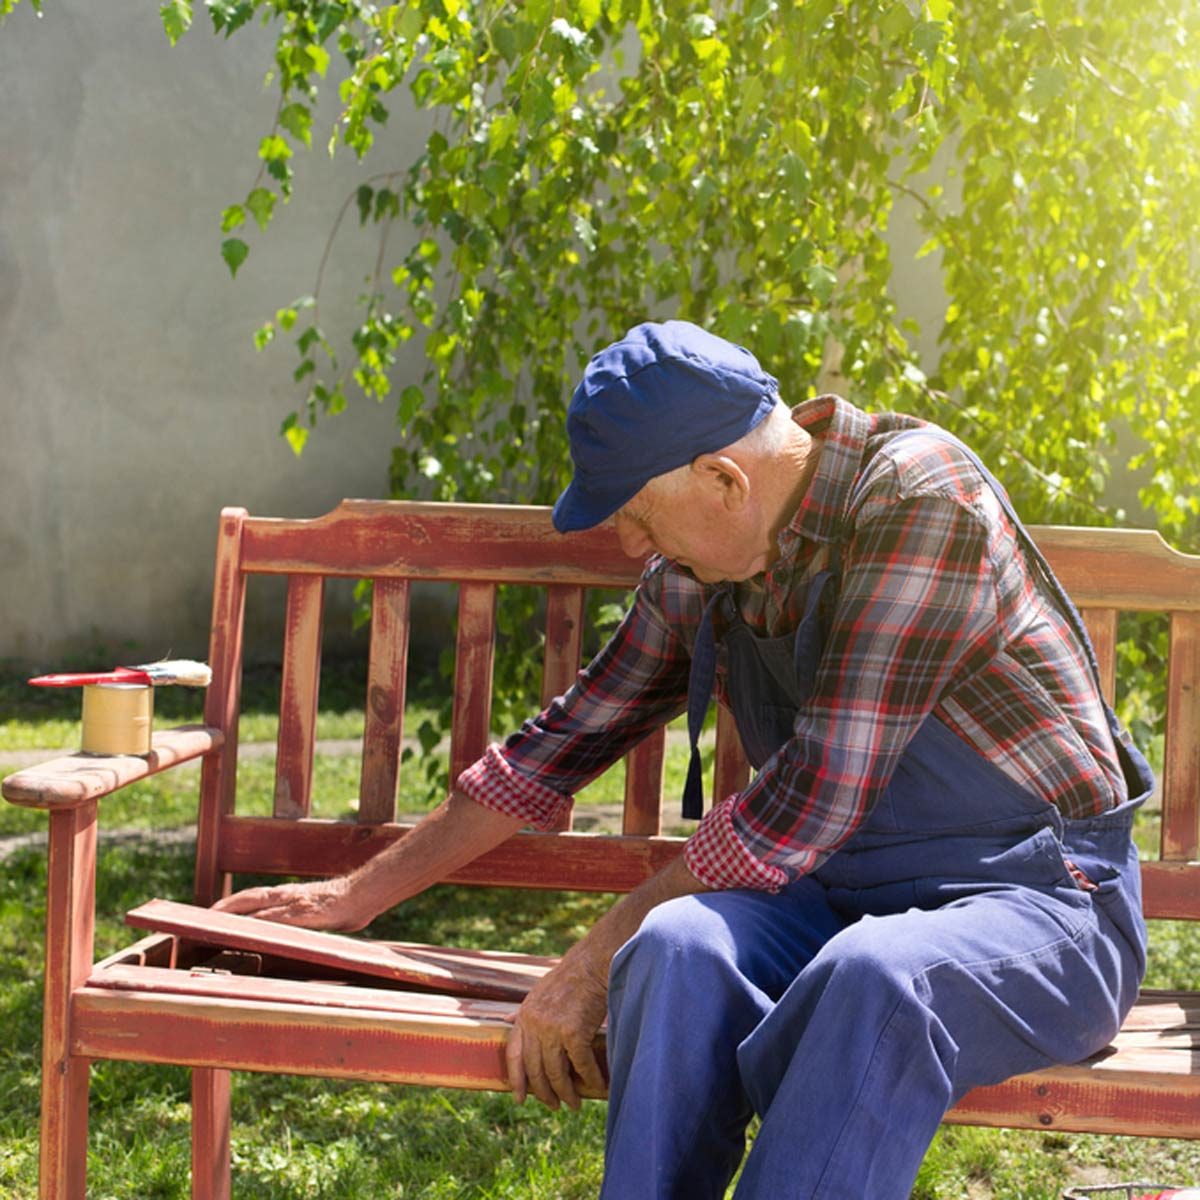 15 Tips for Painting Outdoor Furniture to Last Longer